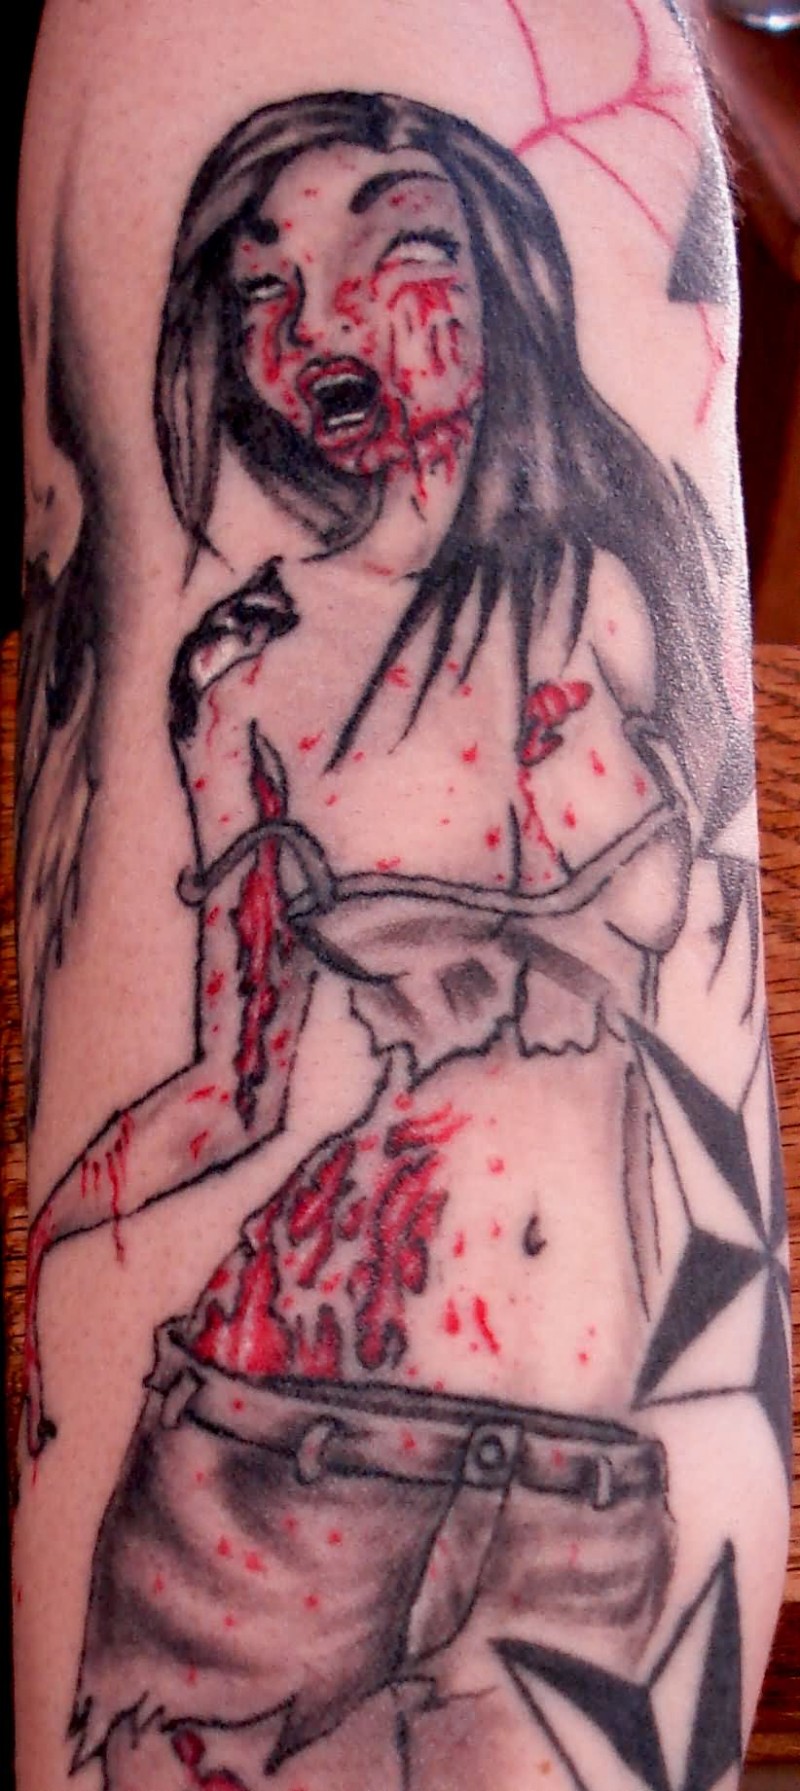 Homemade carelessly painted bloody woman tattoo on shoulder